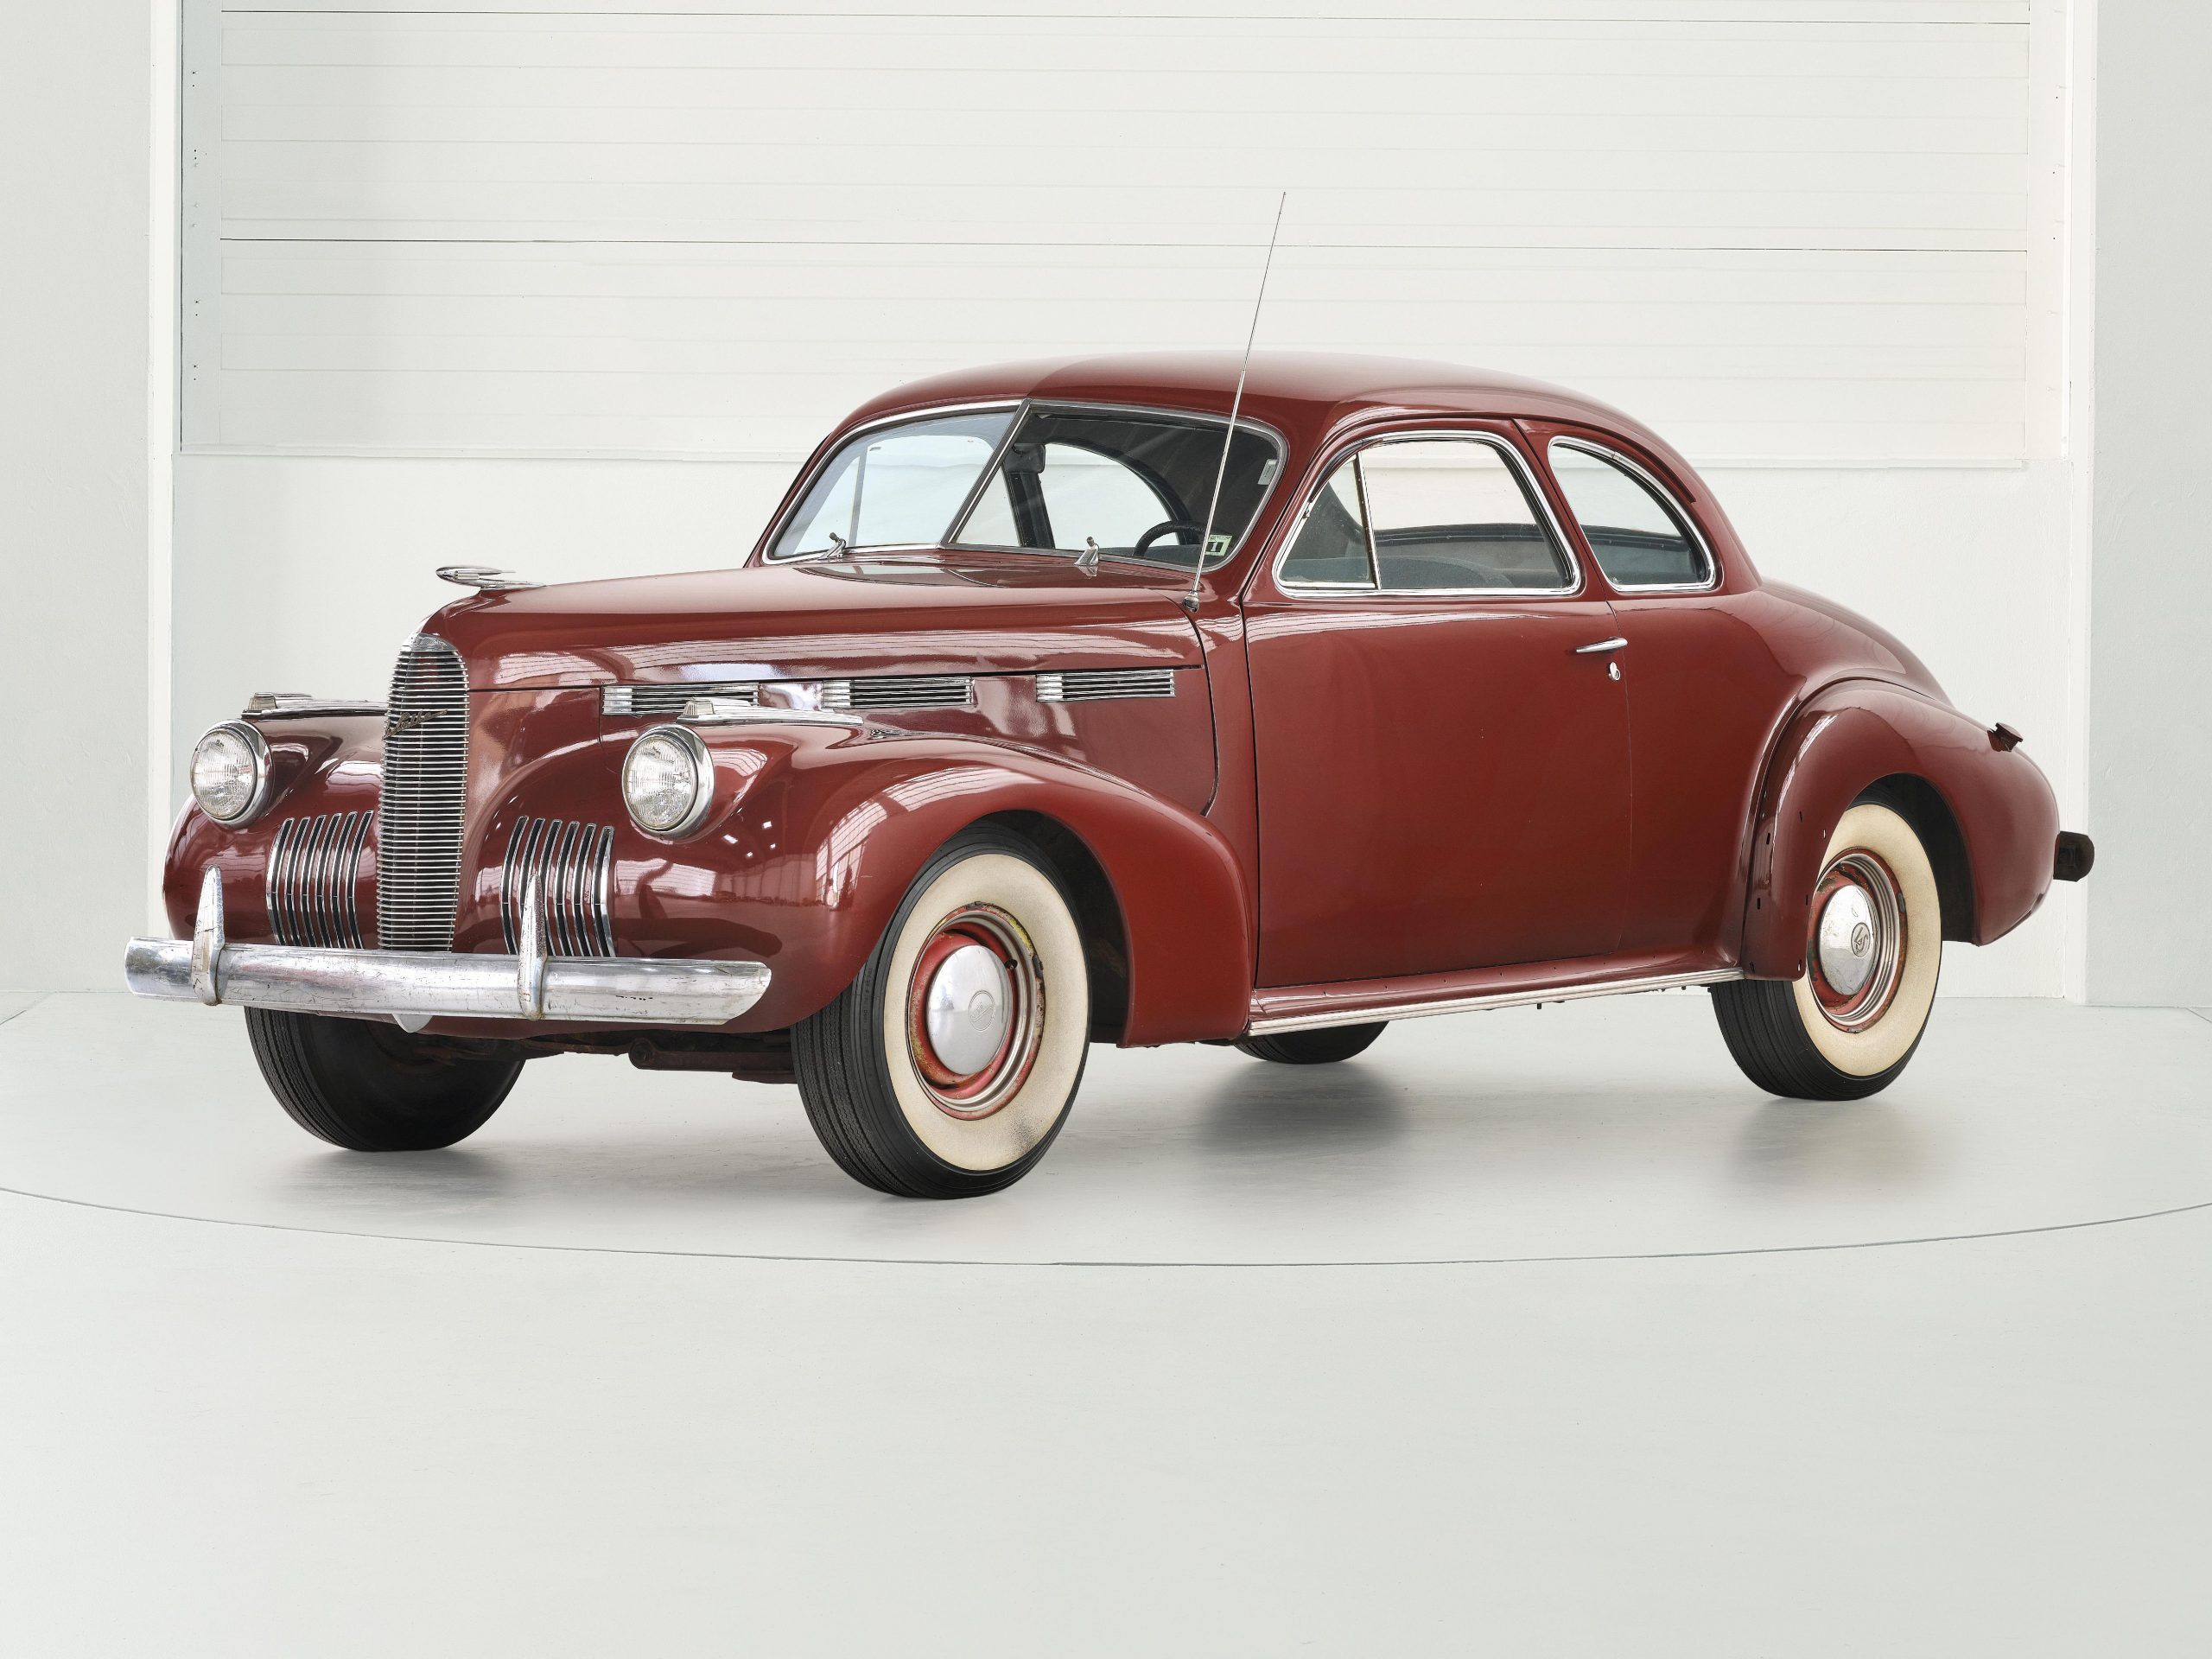 1940 LaSalle Series 40-52 Coupe